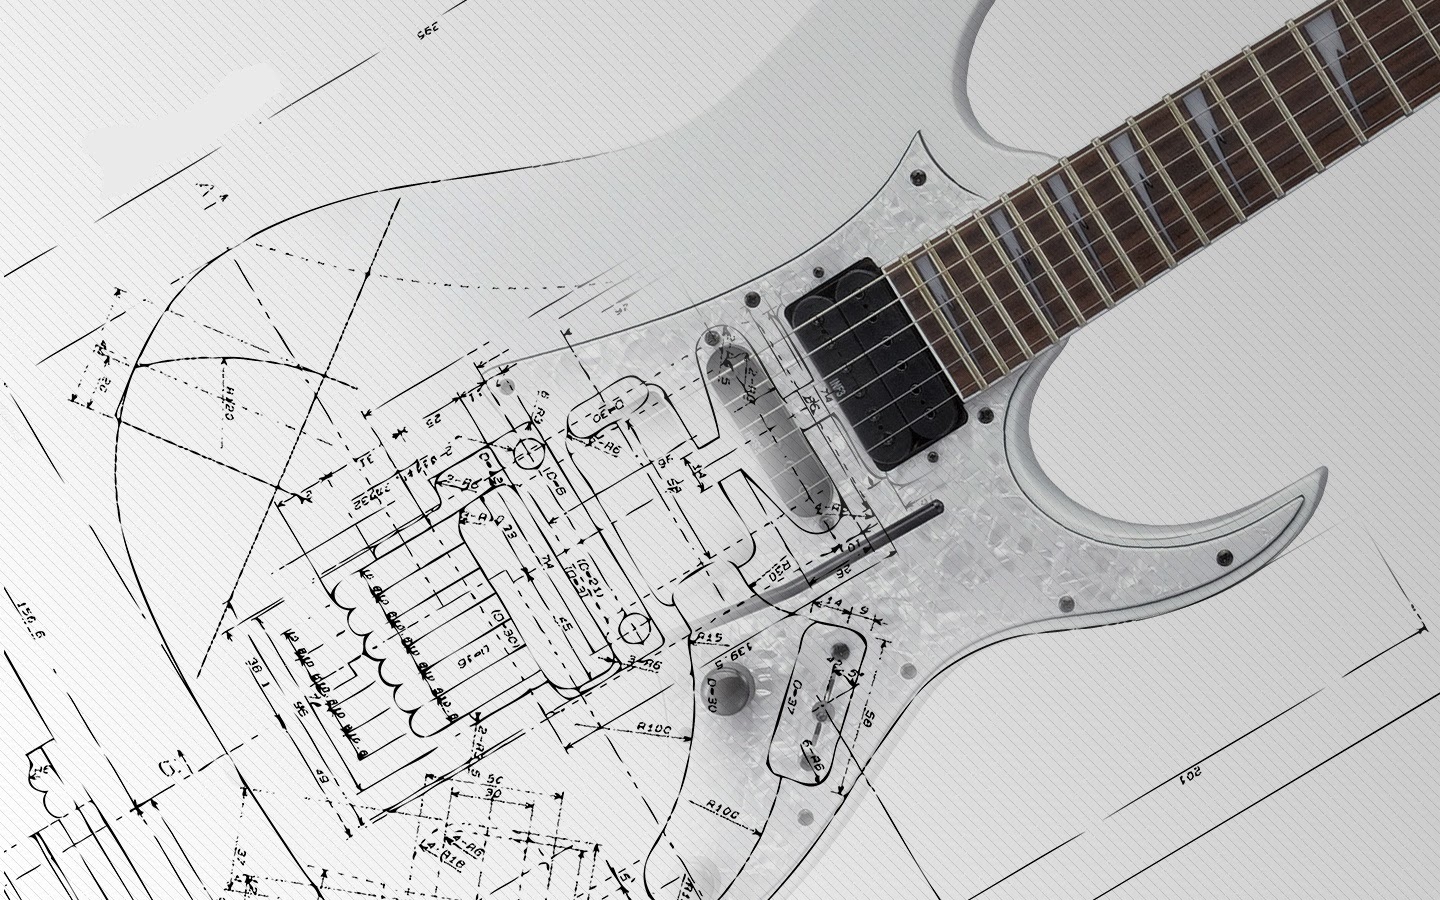 Guitar HD Wallpapers and Images guitar in drawing